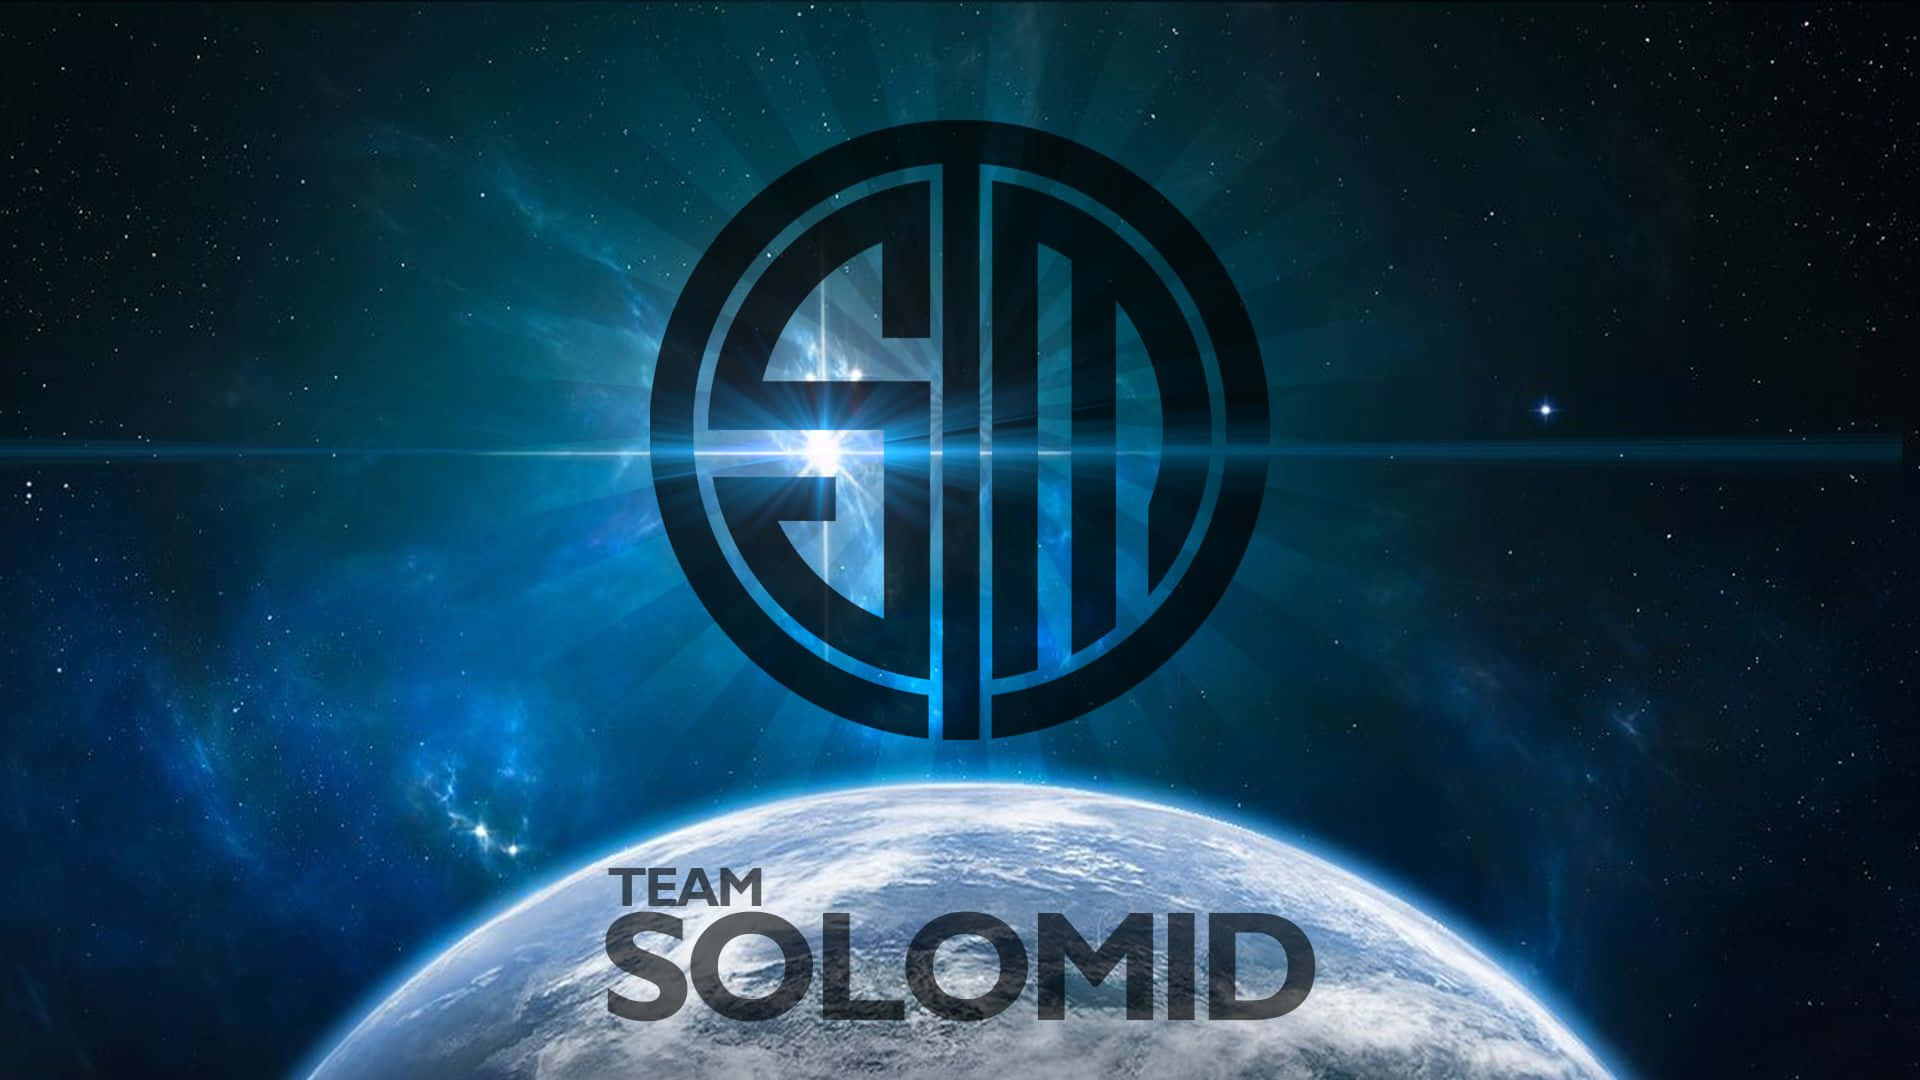 Tsm Paving The Way To Victory Wallpaper